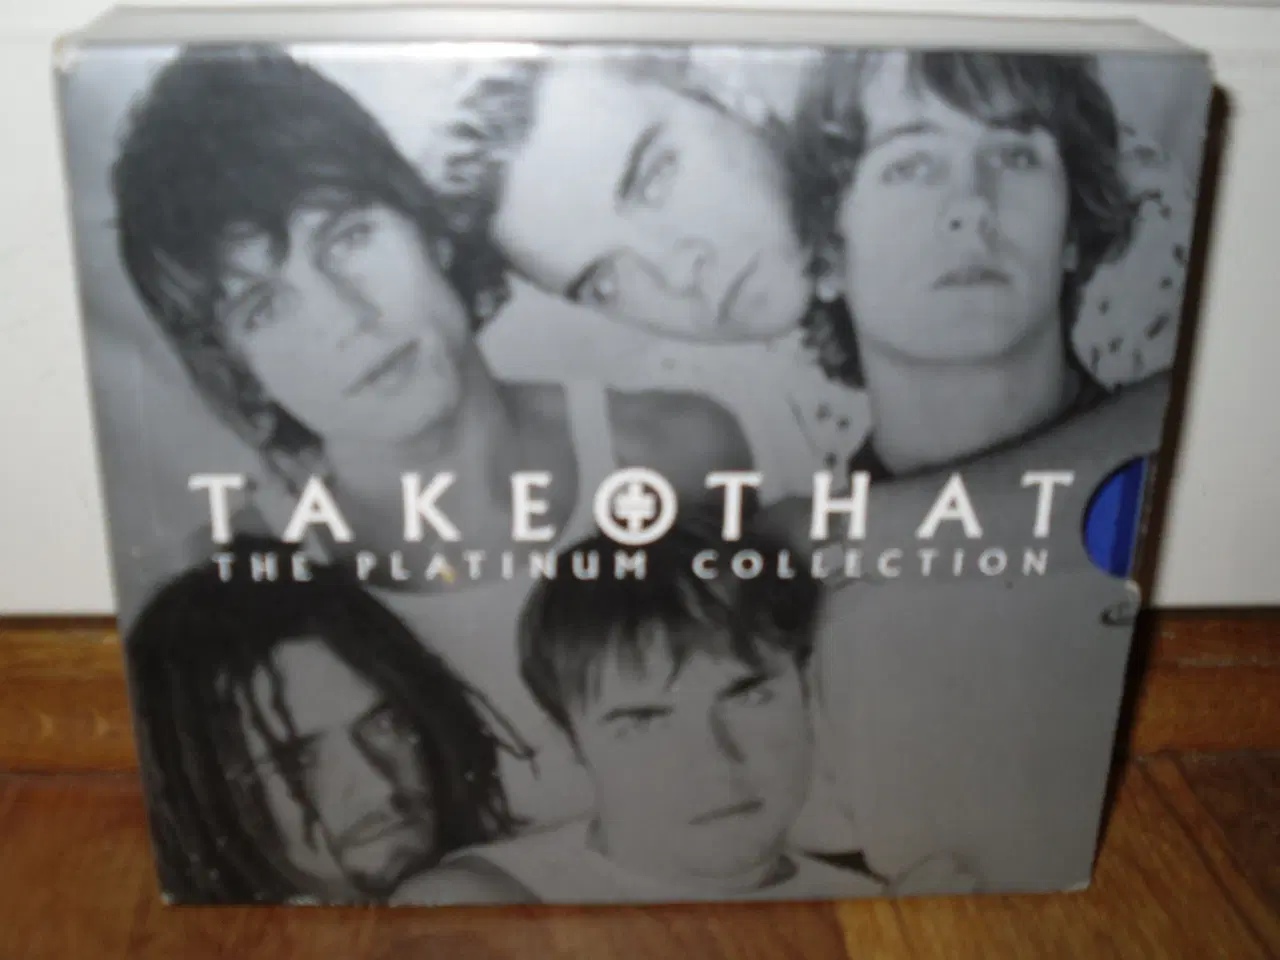 Billede 1 - TAKE THAT; The platinum collection.